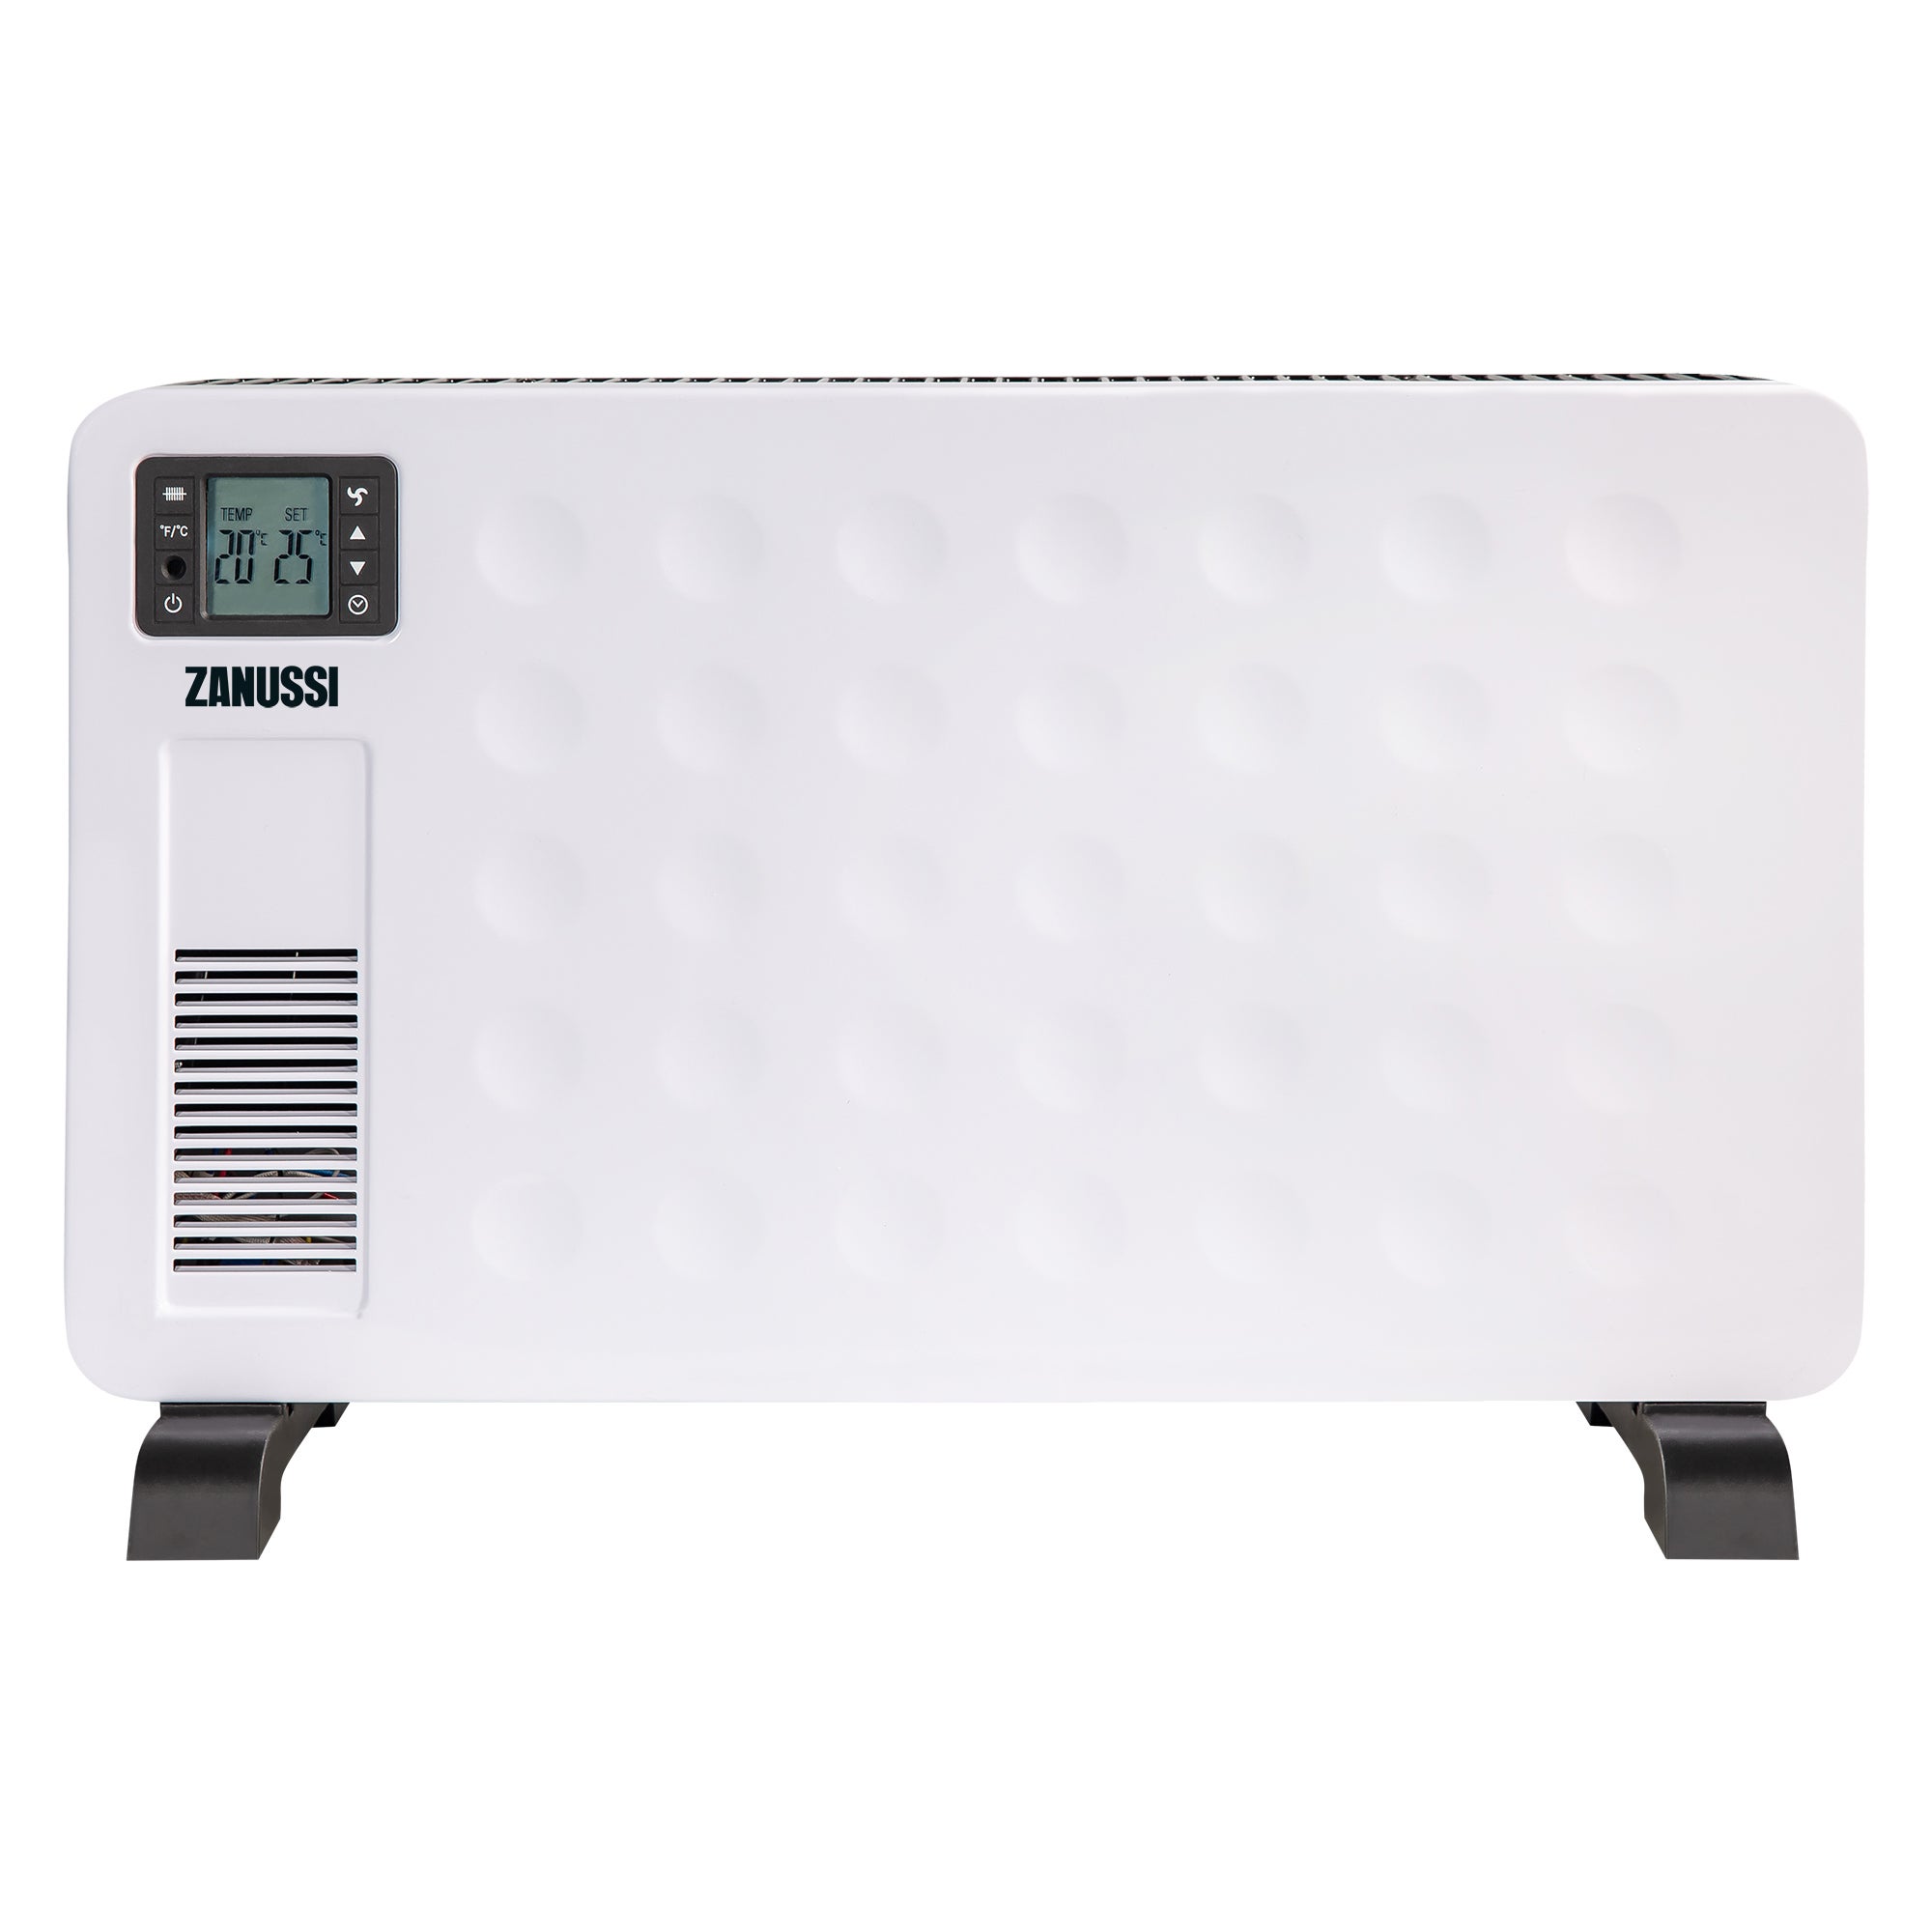 Zanussi 2.3kW Convection Heater with LCD Display